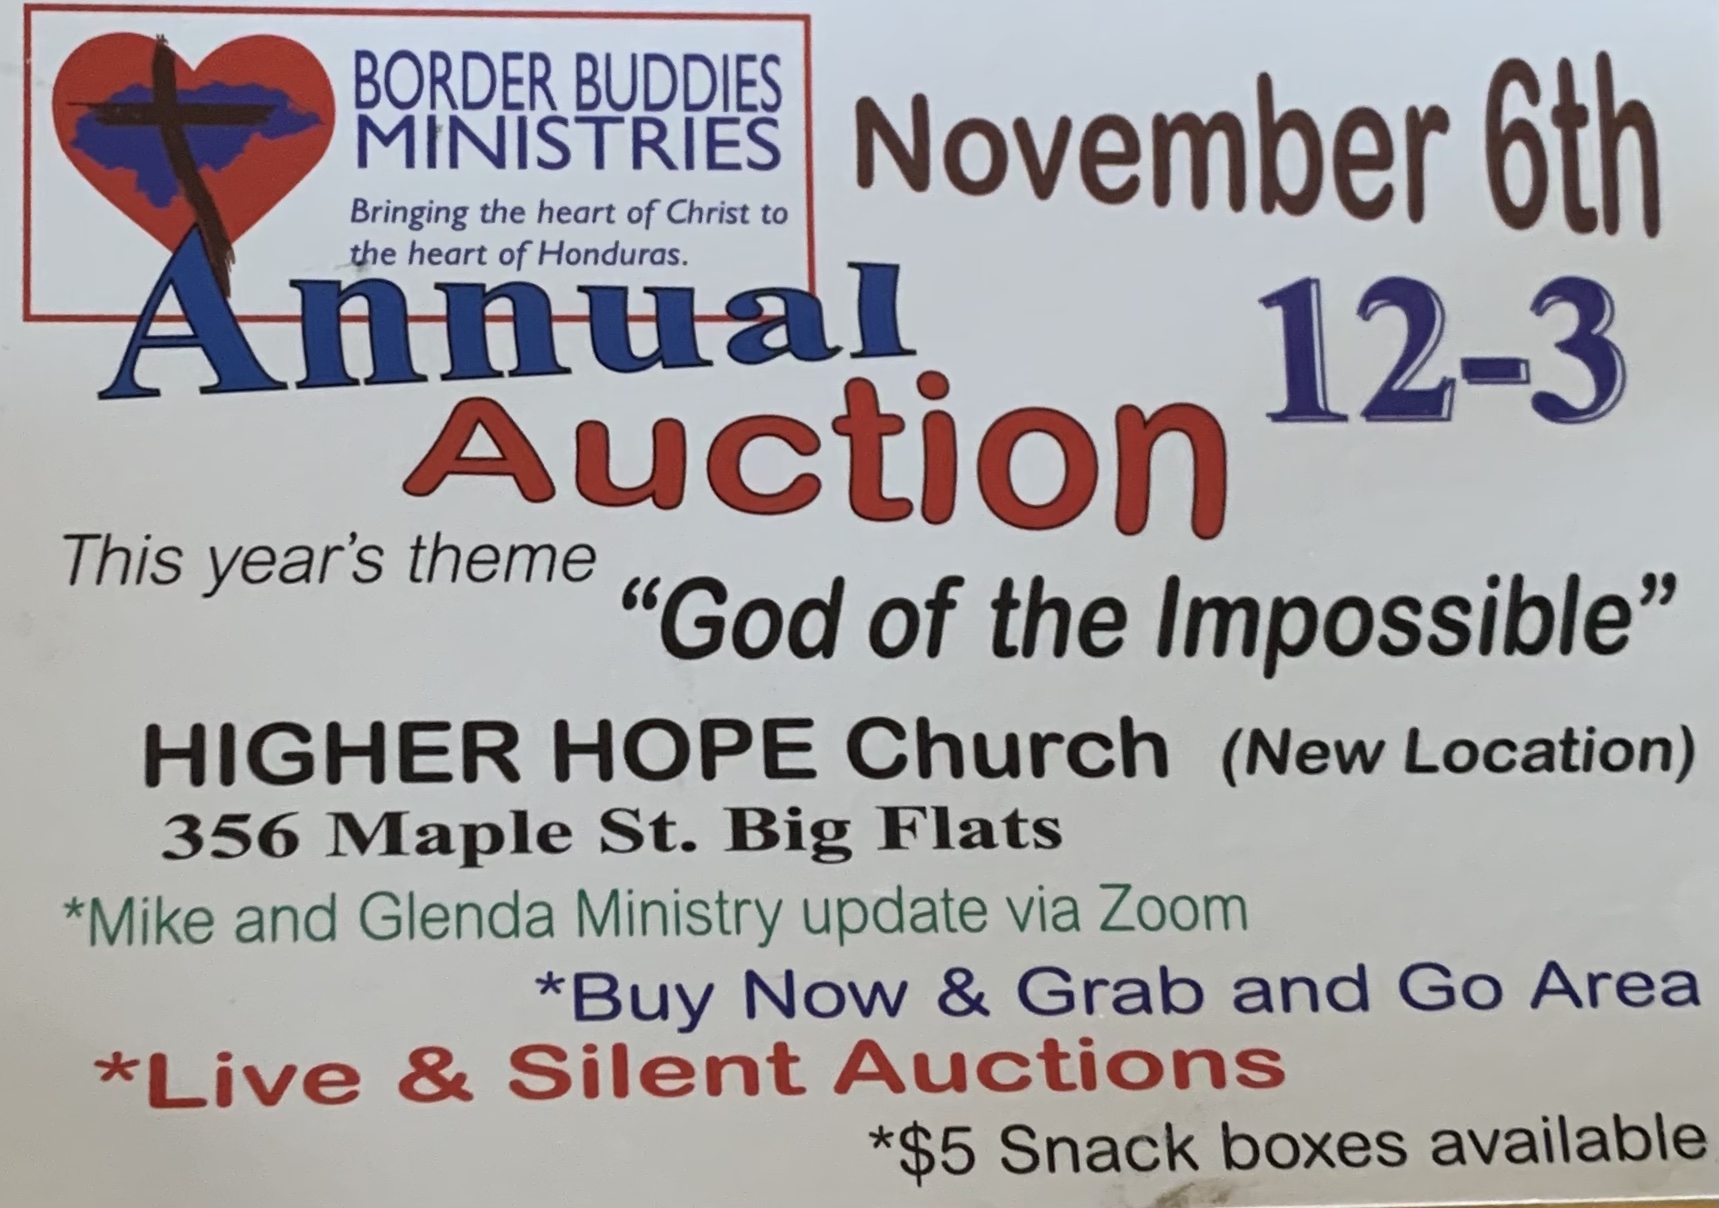 Video Promo for Auction November 6th